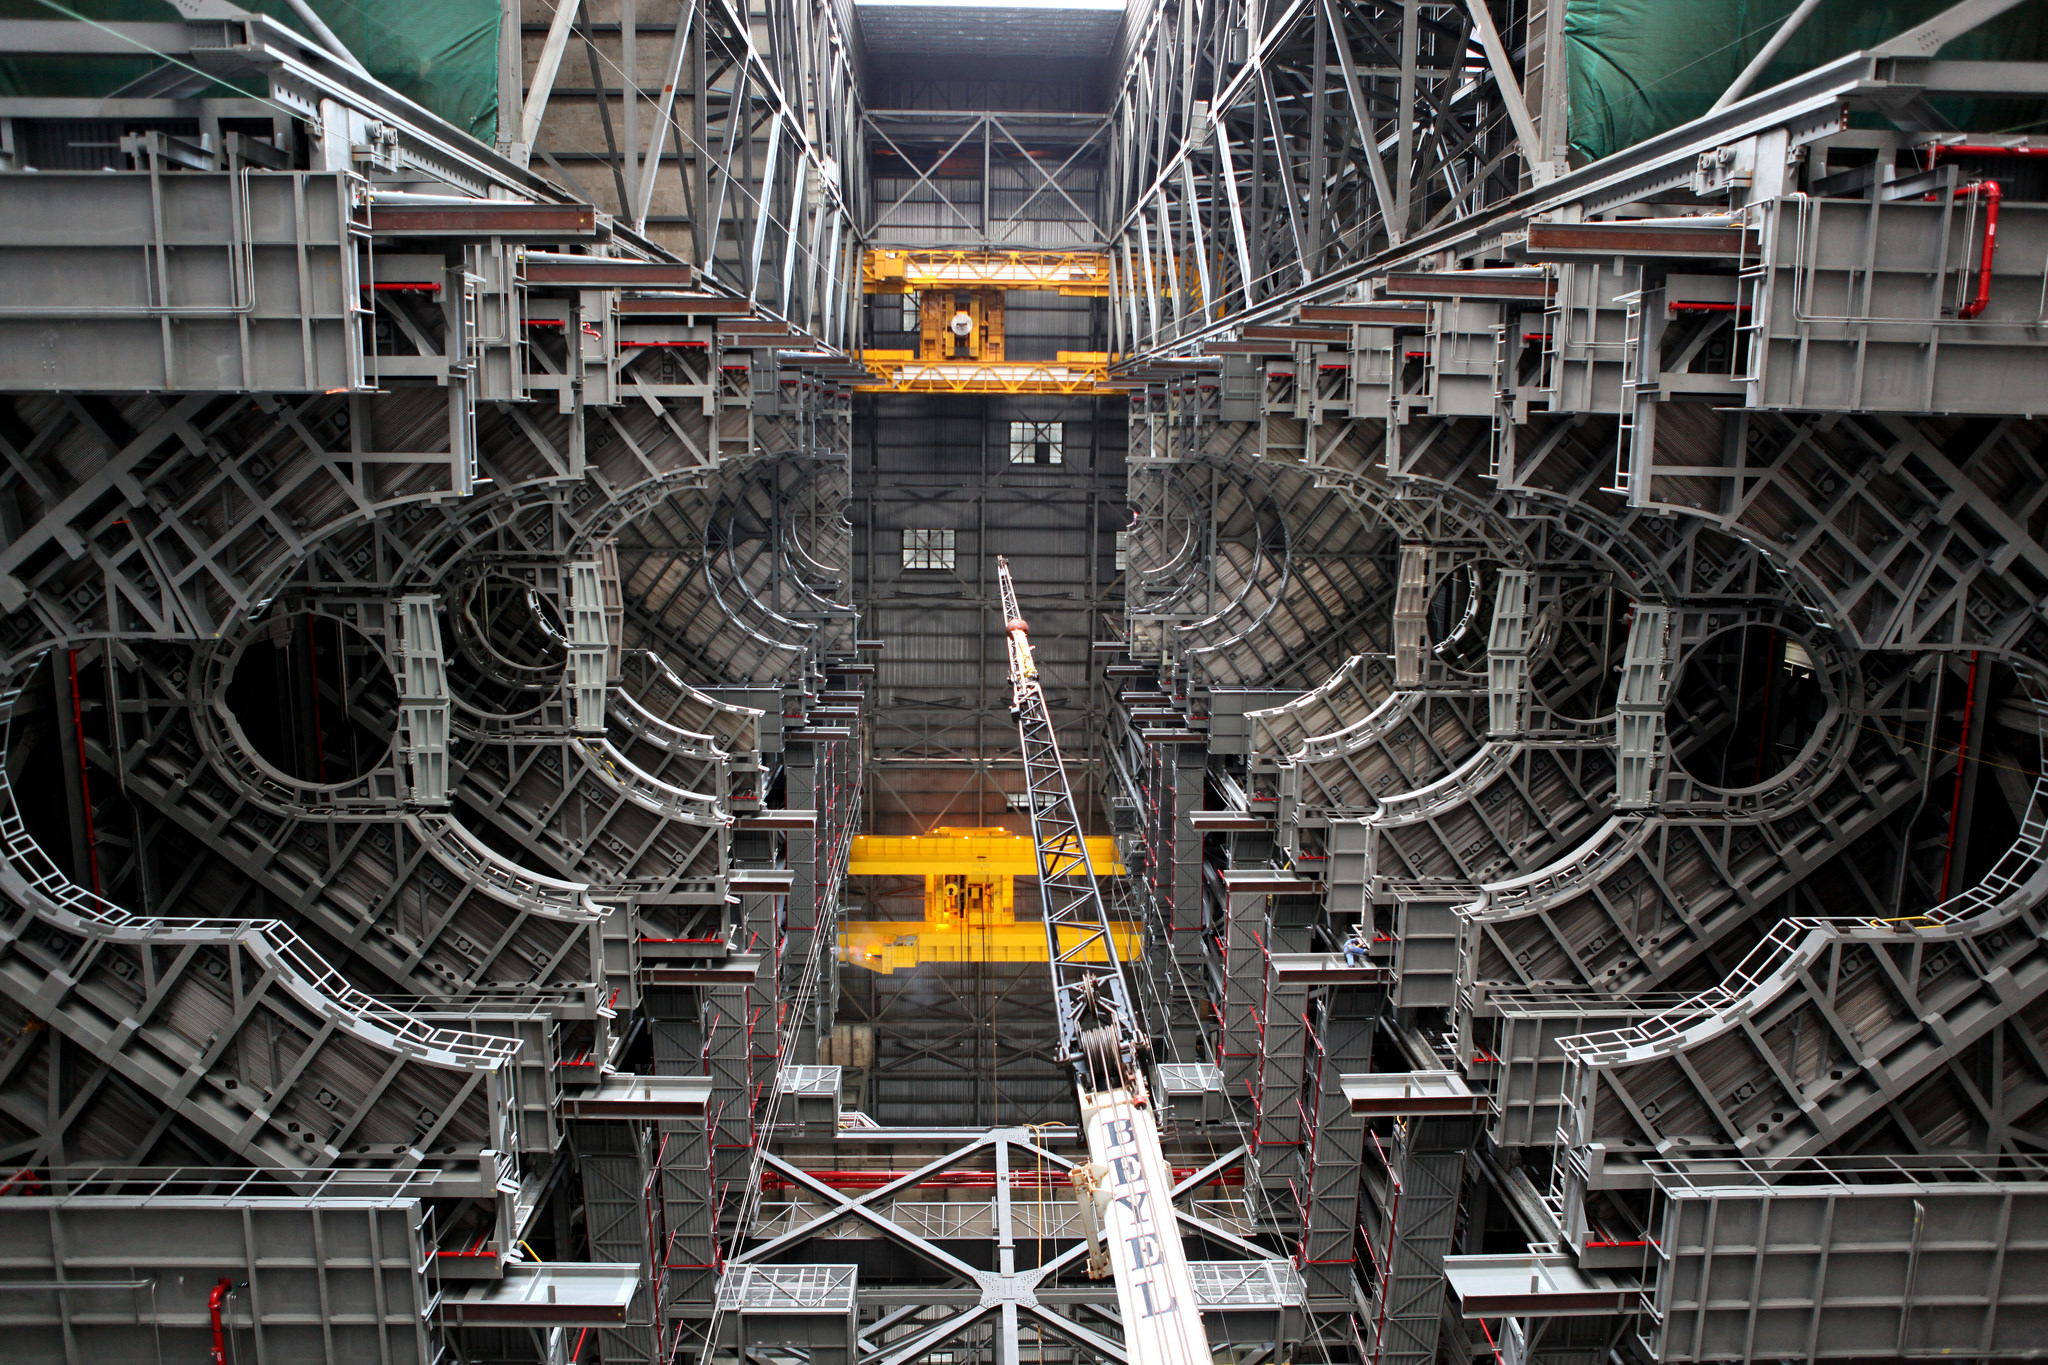 The final platform, A north, is installed in High Bay 3 in the Vehicle Assembly Building.